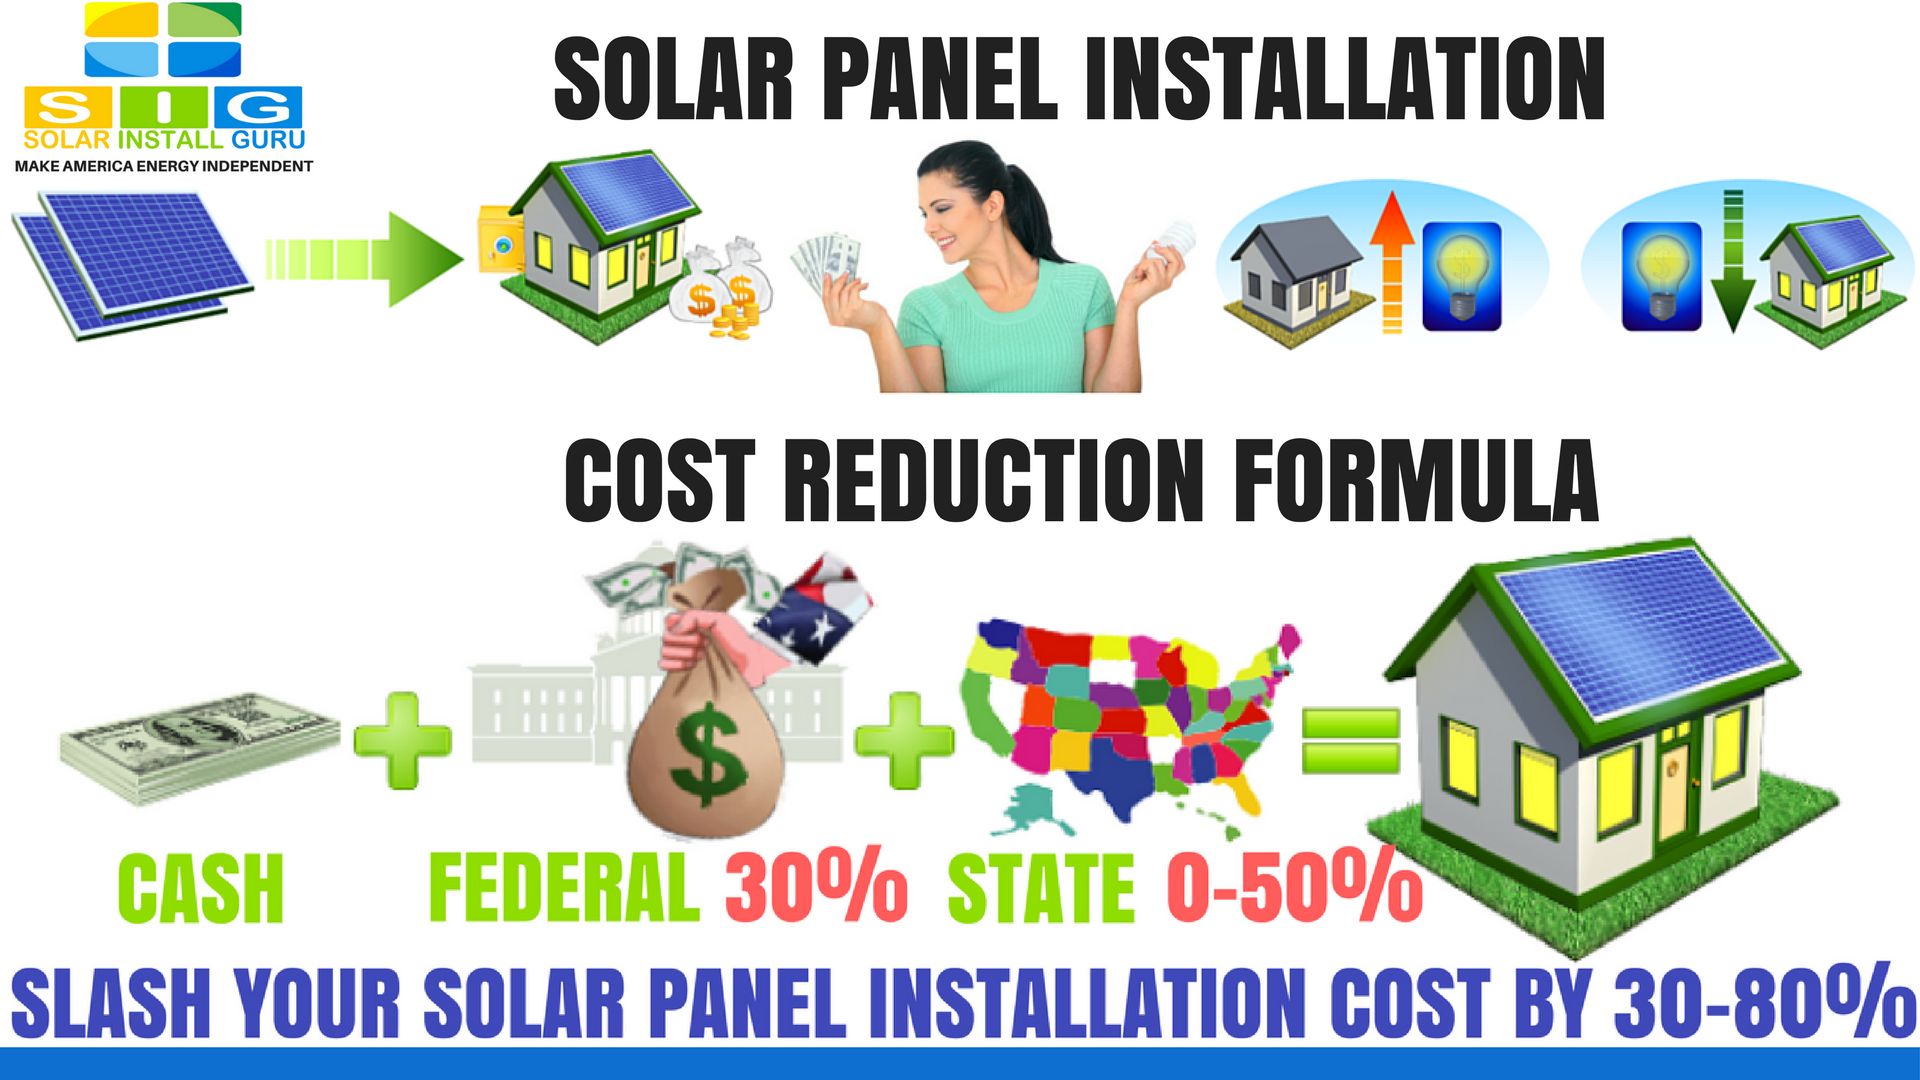 What is The Solar Panel Installation Cost Reduction Formula